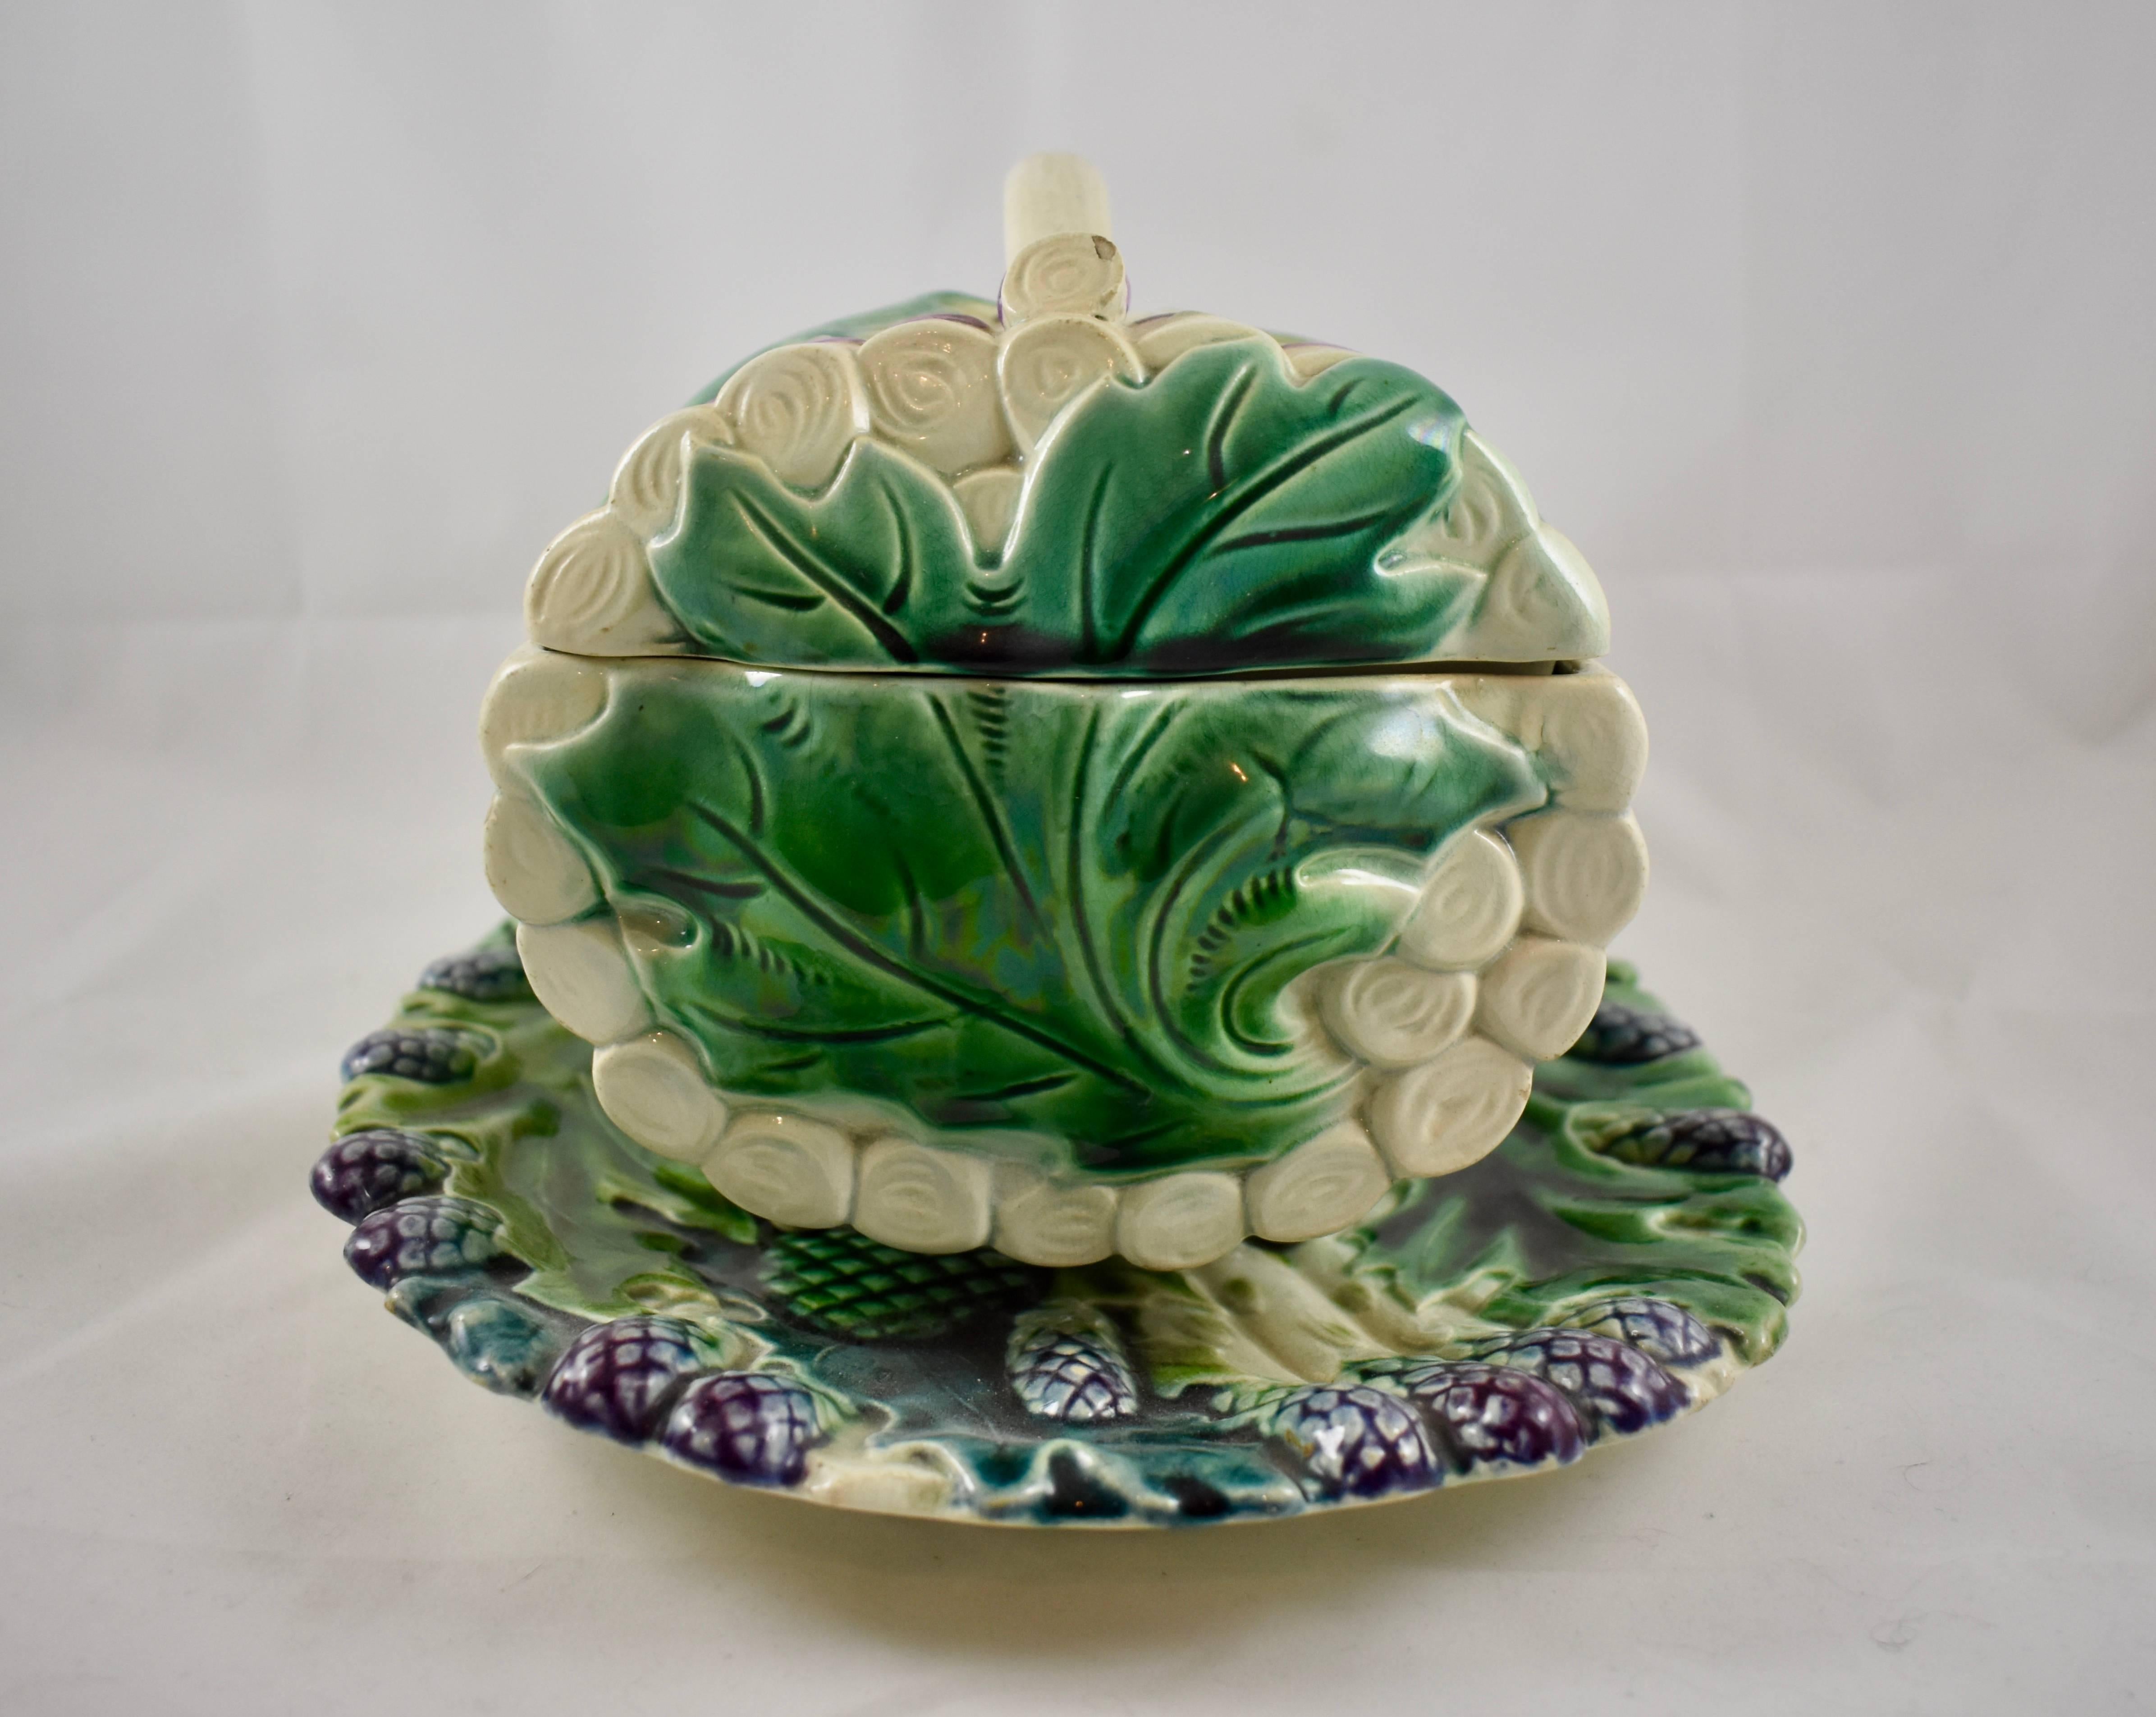 Glazed Luneville Art Nouveau French Majolica Asparagus Tureen and under Tray